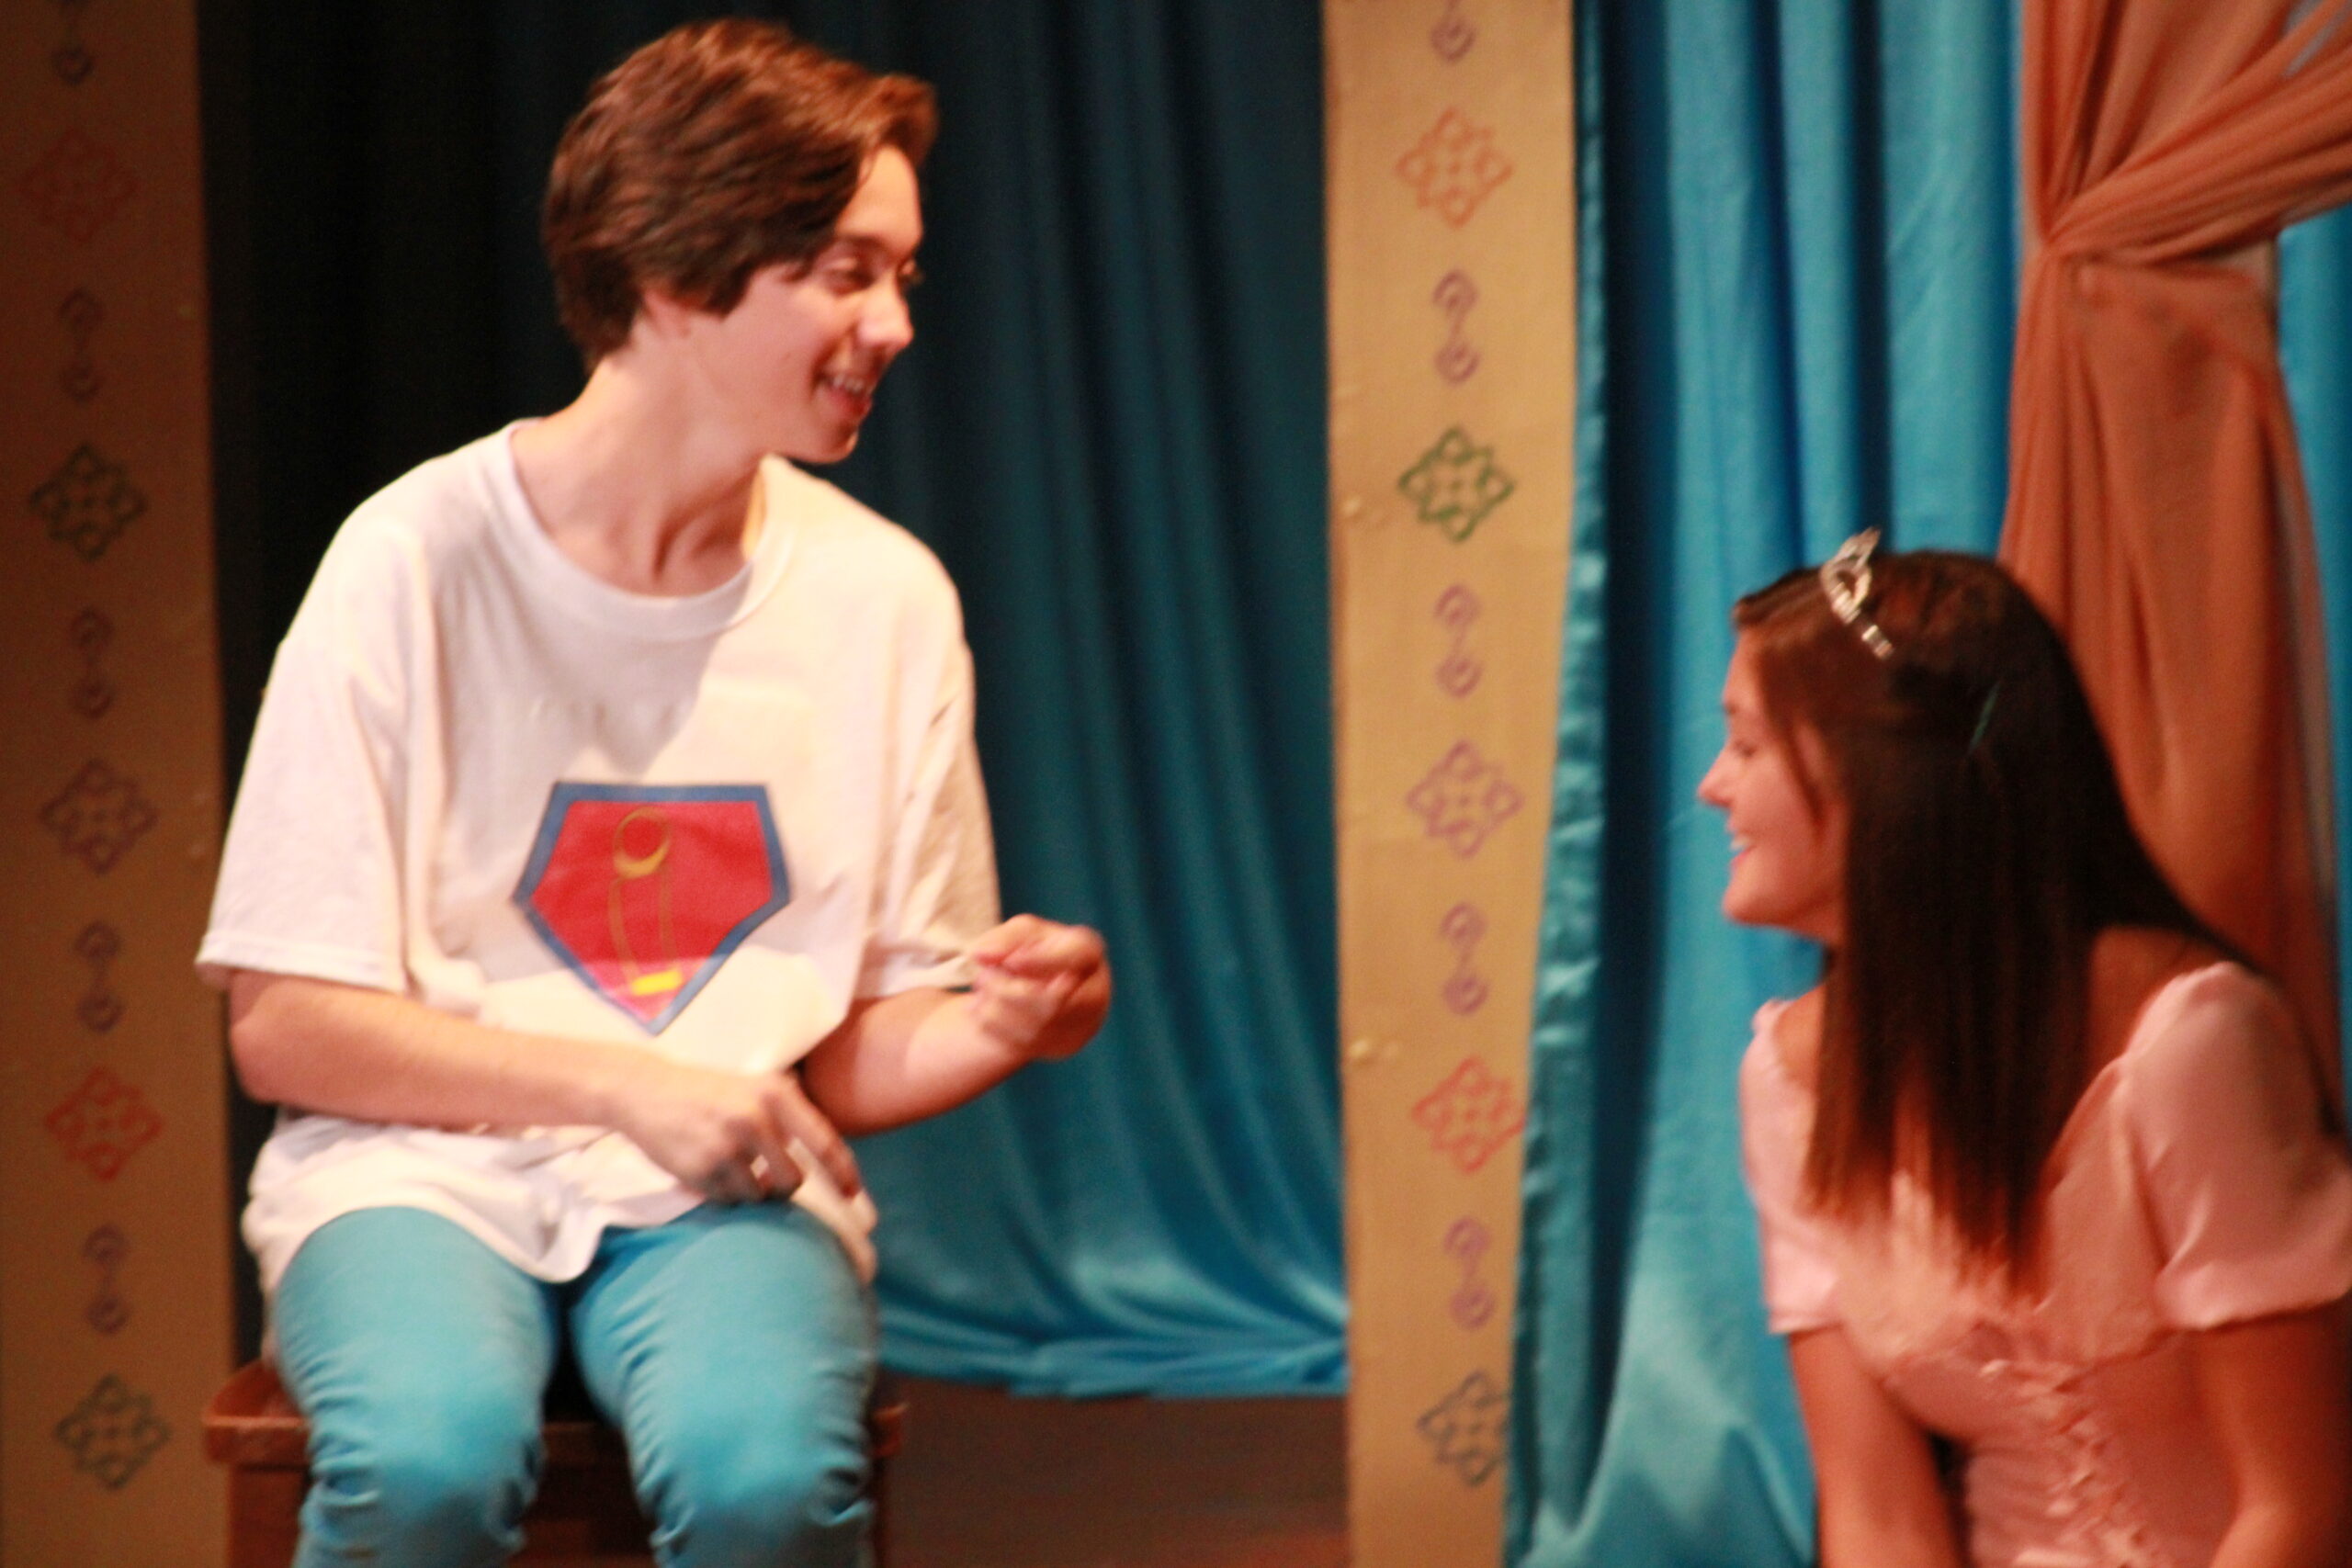 Inky (Scott Sharma) and Princess Penelope (Hannah Nawroth) share a moment before the trial of Sorcerer Slurm begins in the World Premiere of Super Sidekick: The Musical, presented by Theatre Unleashed at The Sherry Theater in North Hollywood, CA